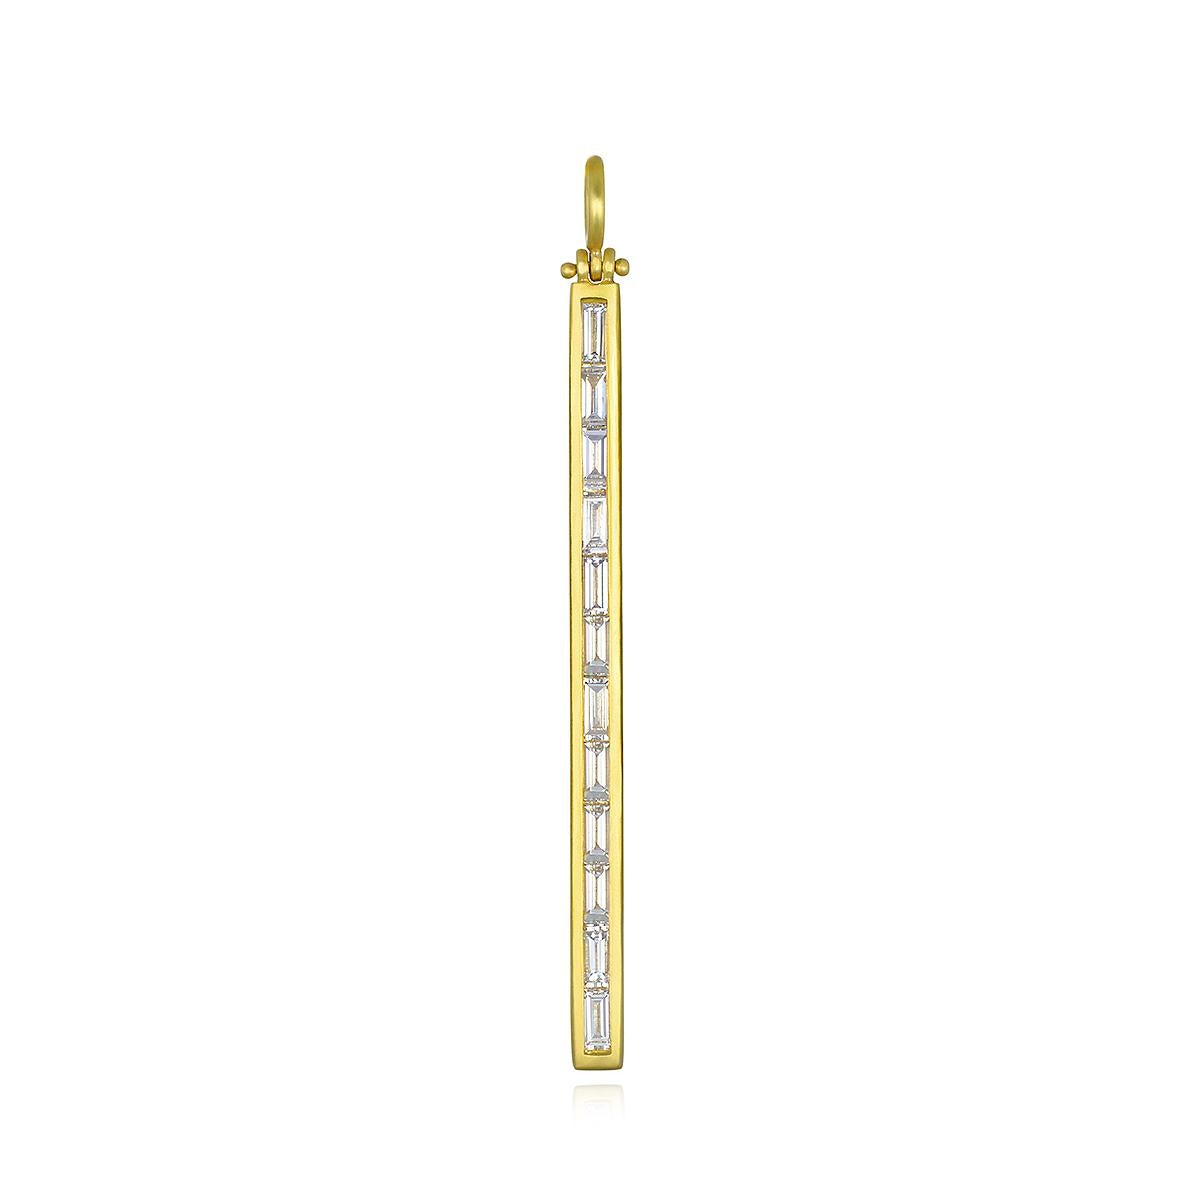 Sleek and elegant, Faye's Diamond Baguette Hinged Bar Pendant is handcrafted in 18 karat gold with white diamonds. Classic yet made modern with its bar shape and matte finish, this necklace is great on its own or layered and effortlessly goes from